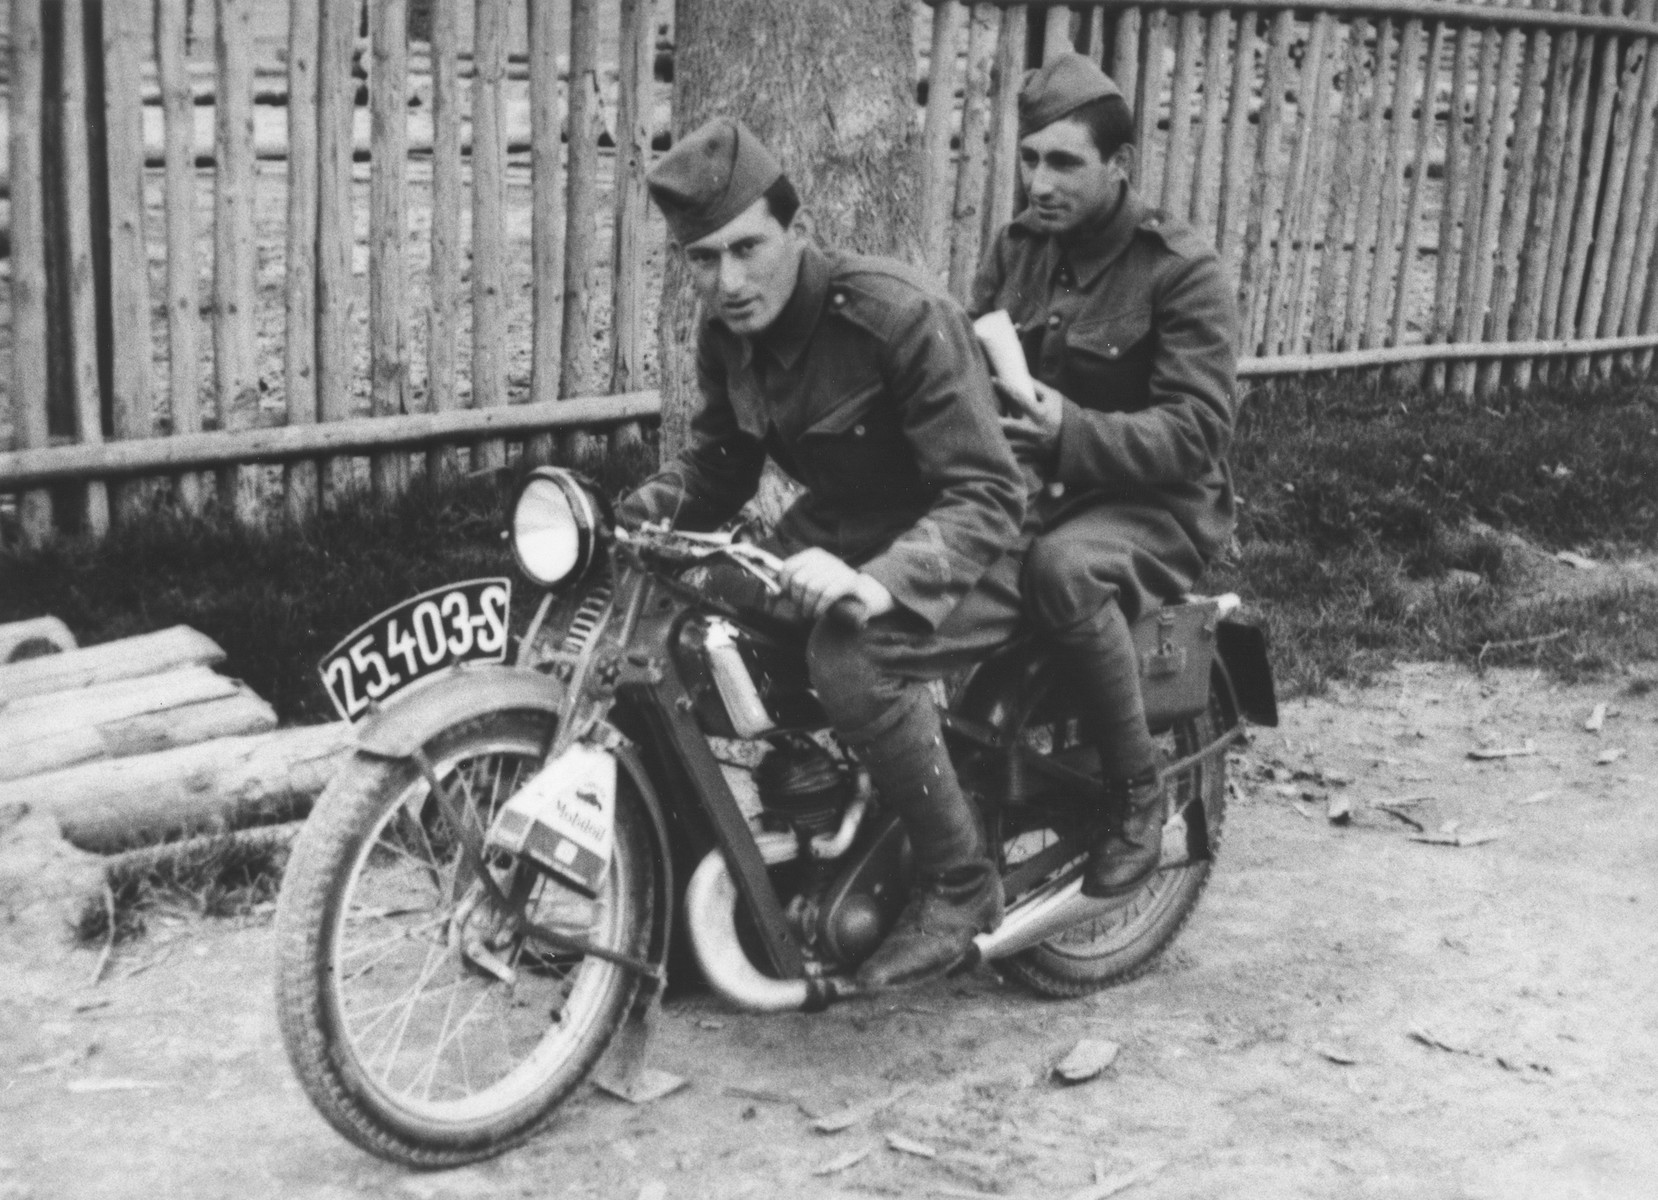 Two Jewish members of the Sixth Labor Battalion (VI Prapor) ride a motorcycle at a Slovak labor camp.